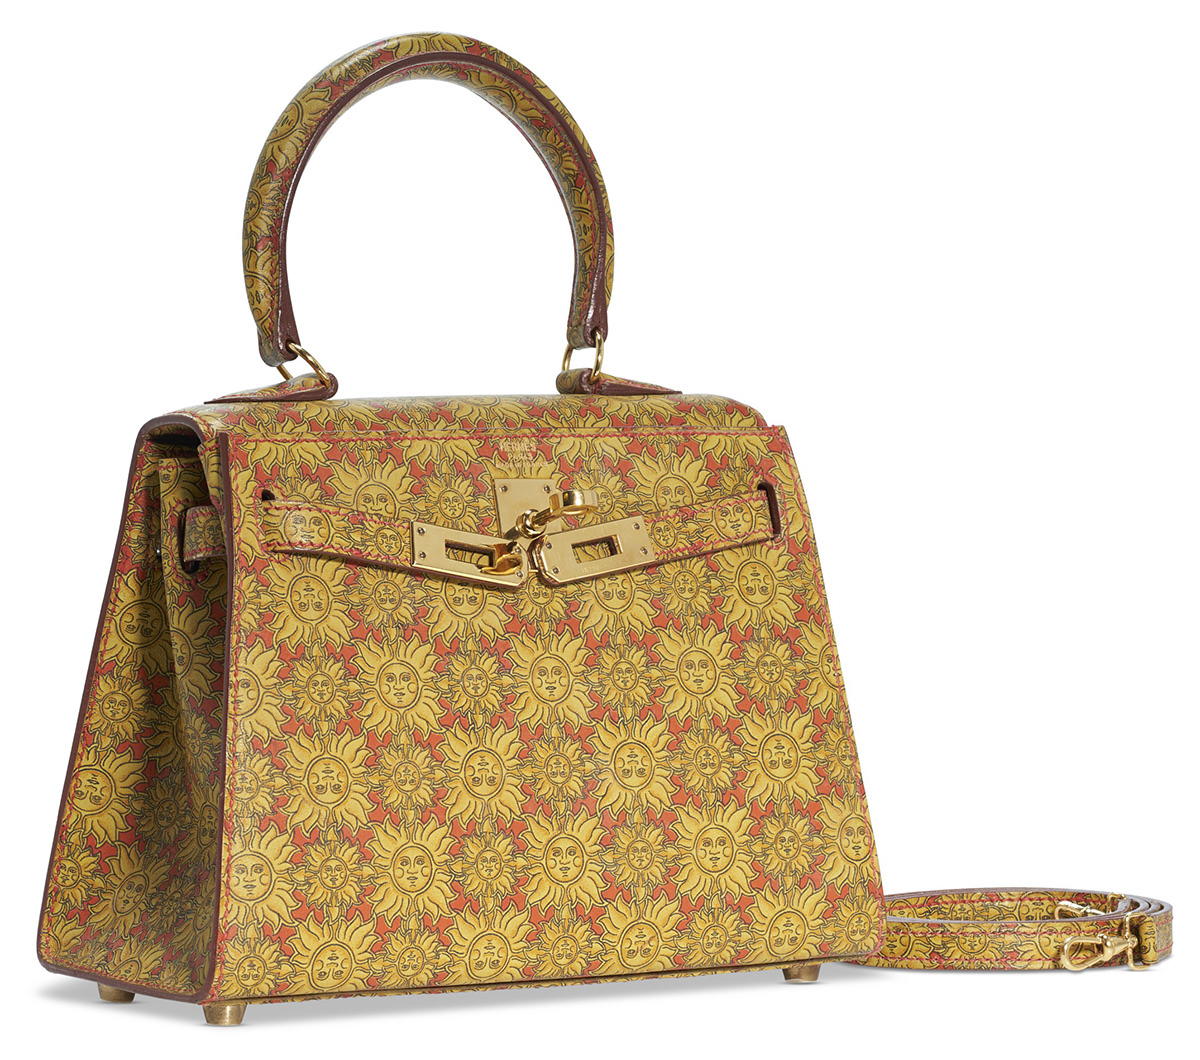 All About the Rare Hermès Kelly 25 Going up for Auction at Sotheby's